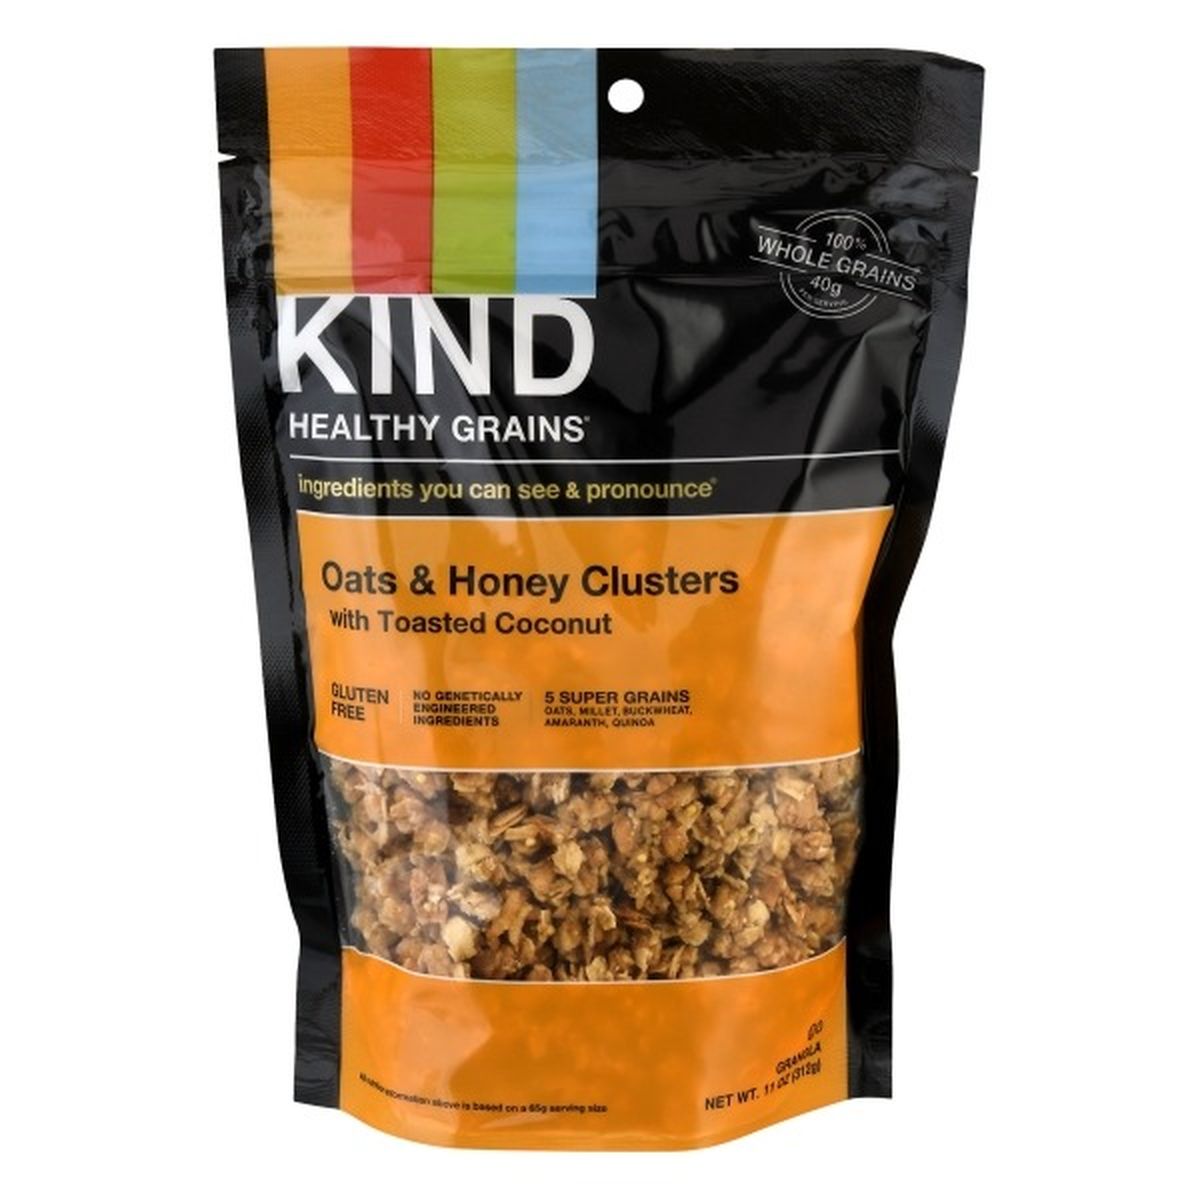 Calories in KIND Healthy Grains Granola, Oats & Honey Clusters with Toasted Coconut